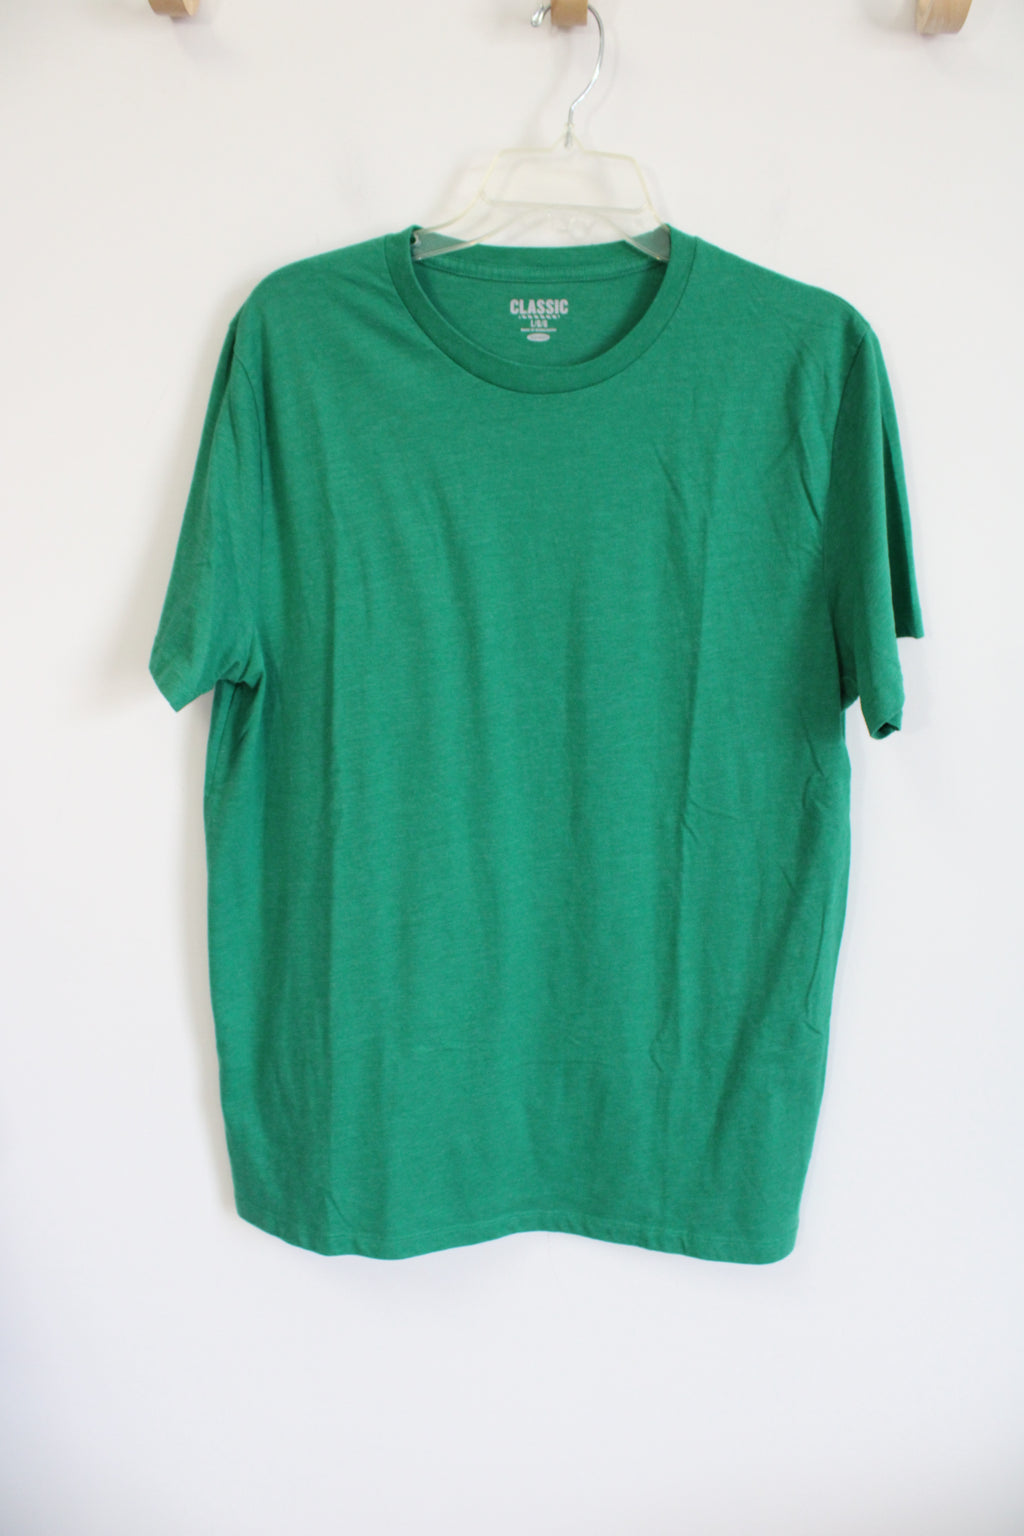 Old Navy Green Classic Fit Tee | L